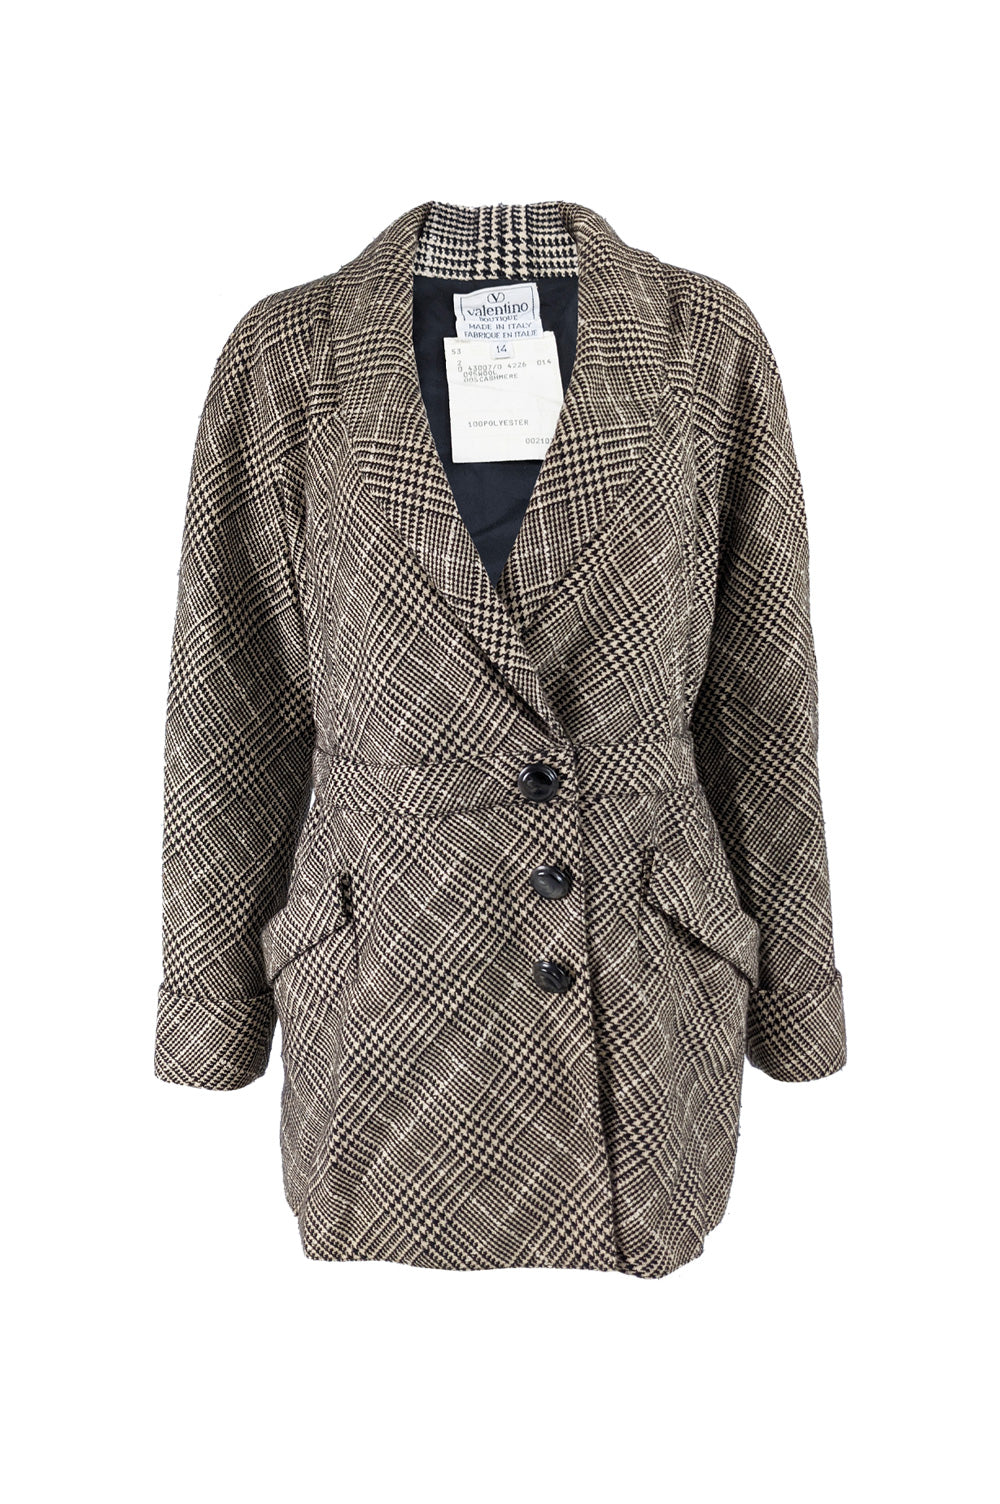 Valentino Vintage Womens Houndstooth Wool & Cashmere Jacket, 1980s